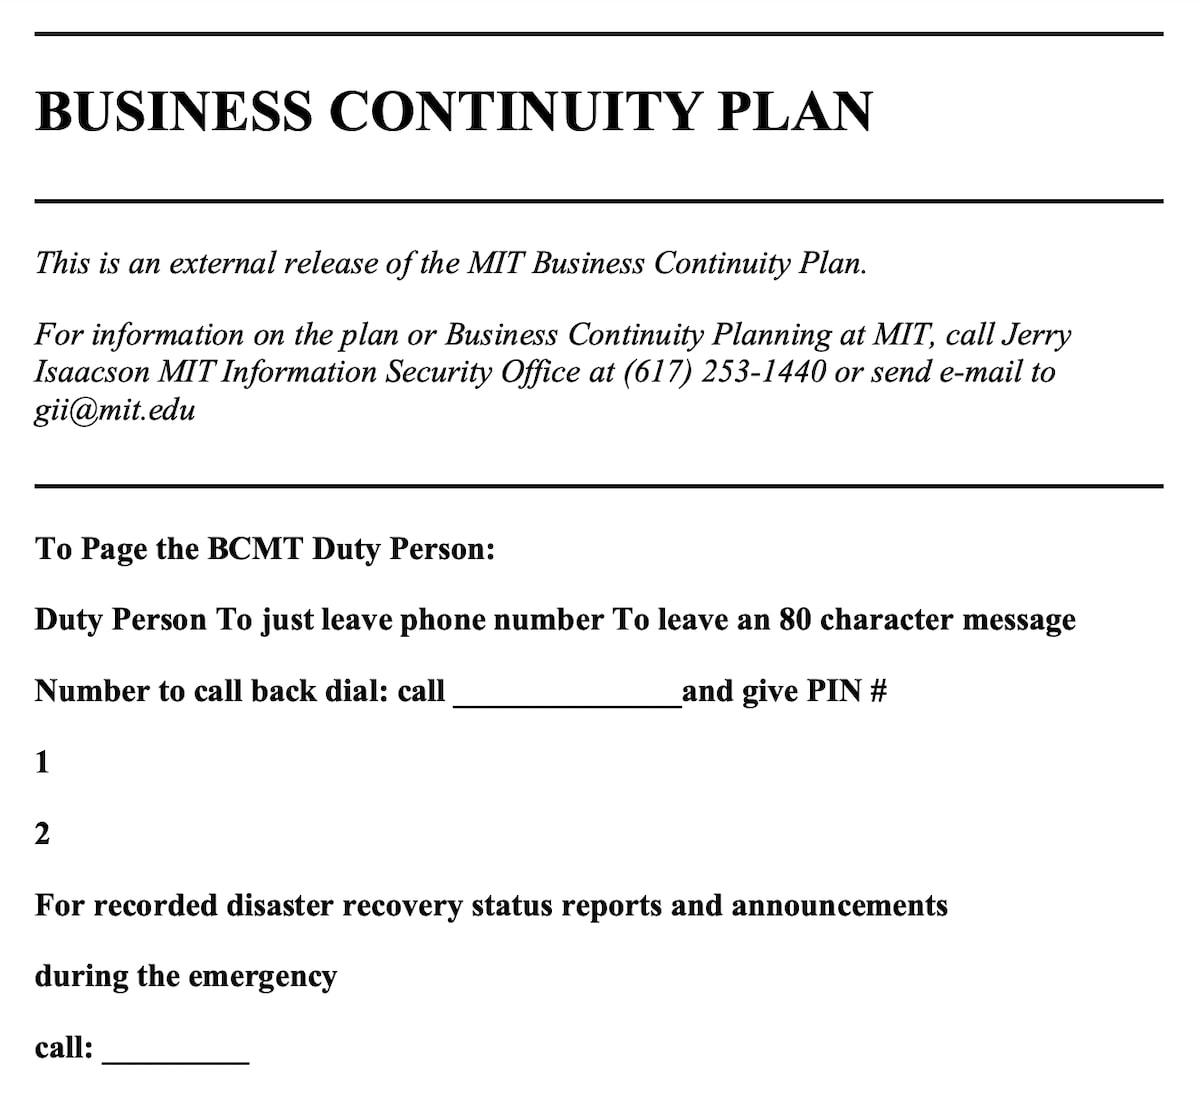 Continuity Plan Templates: Word Business Continuity Plan Template